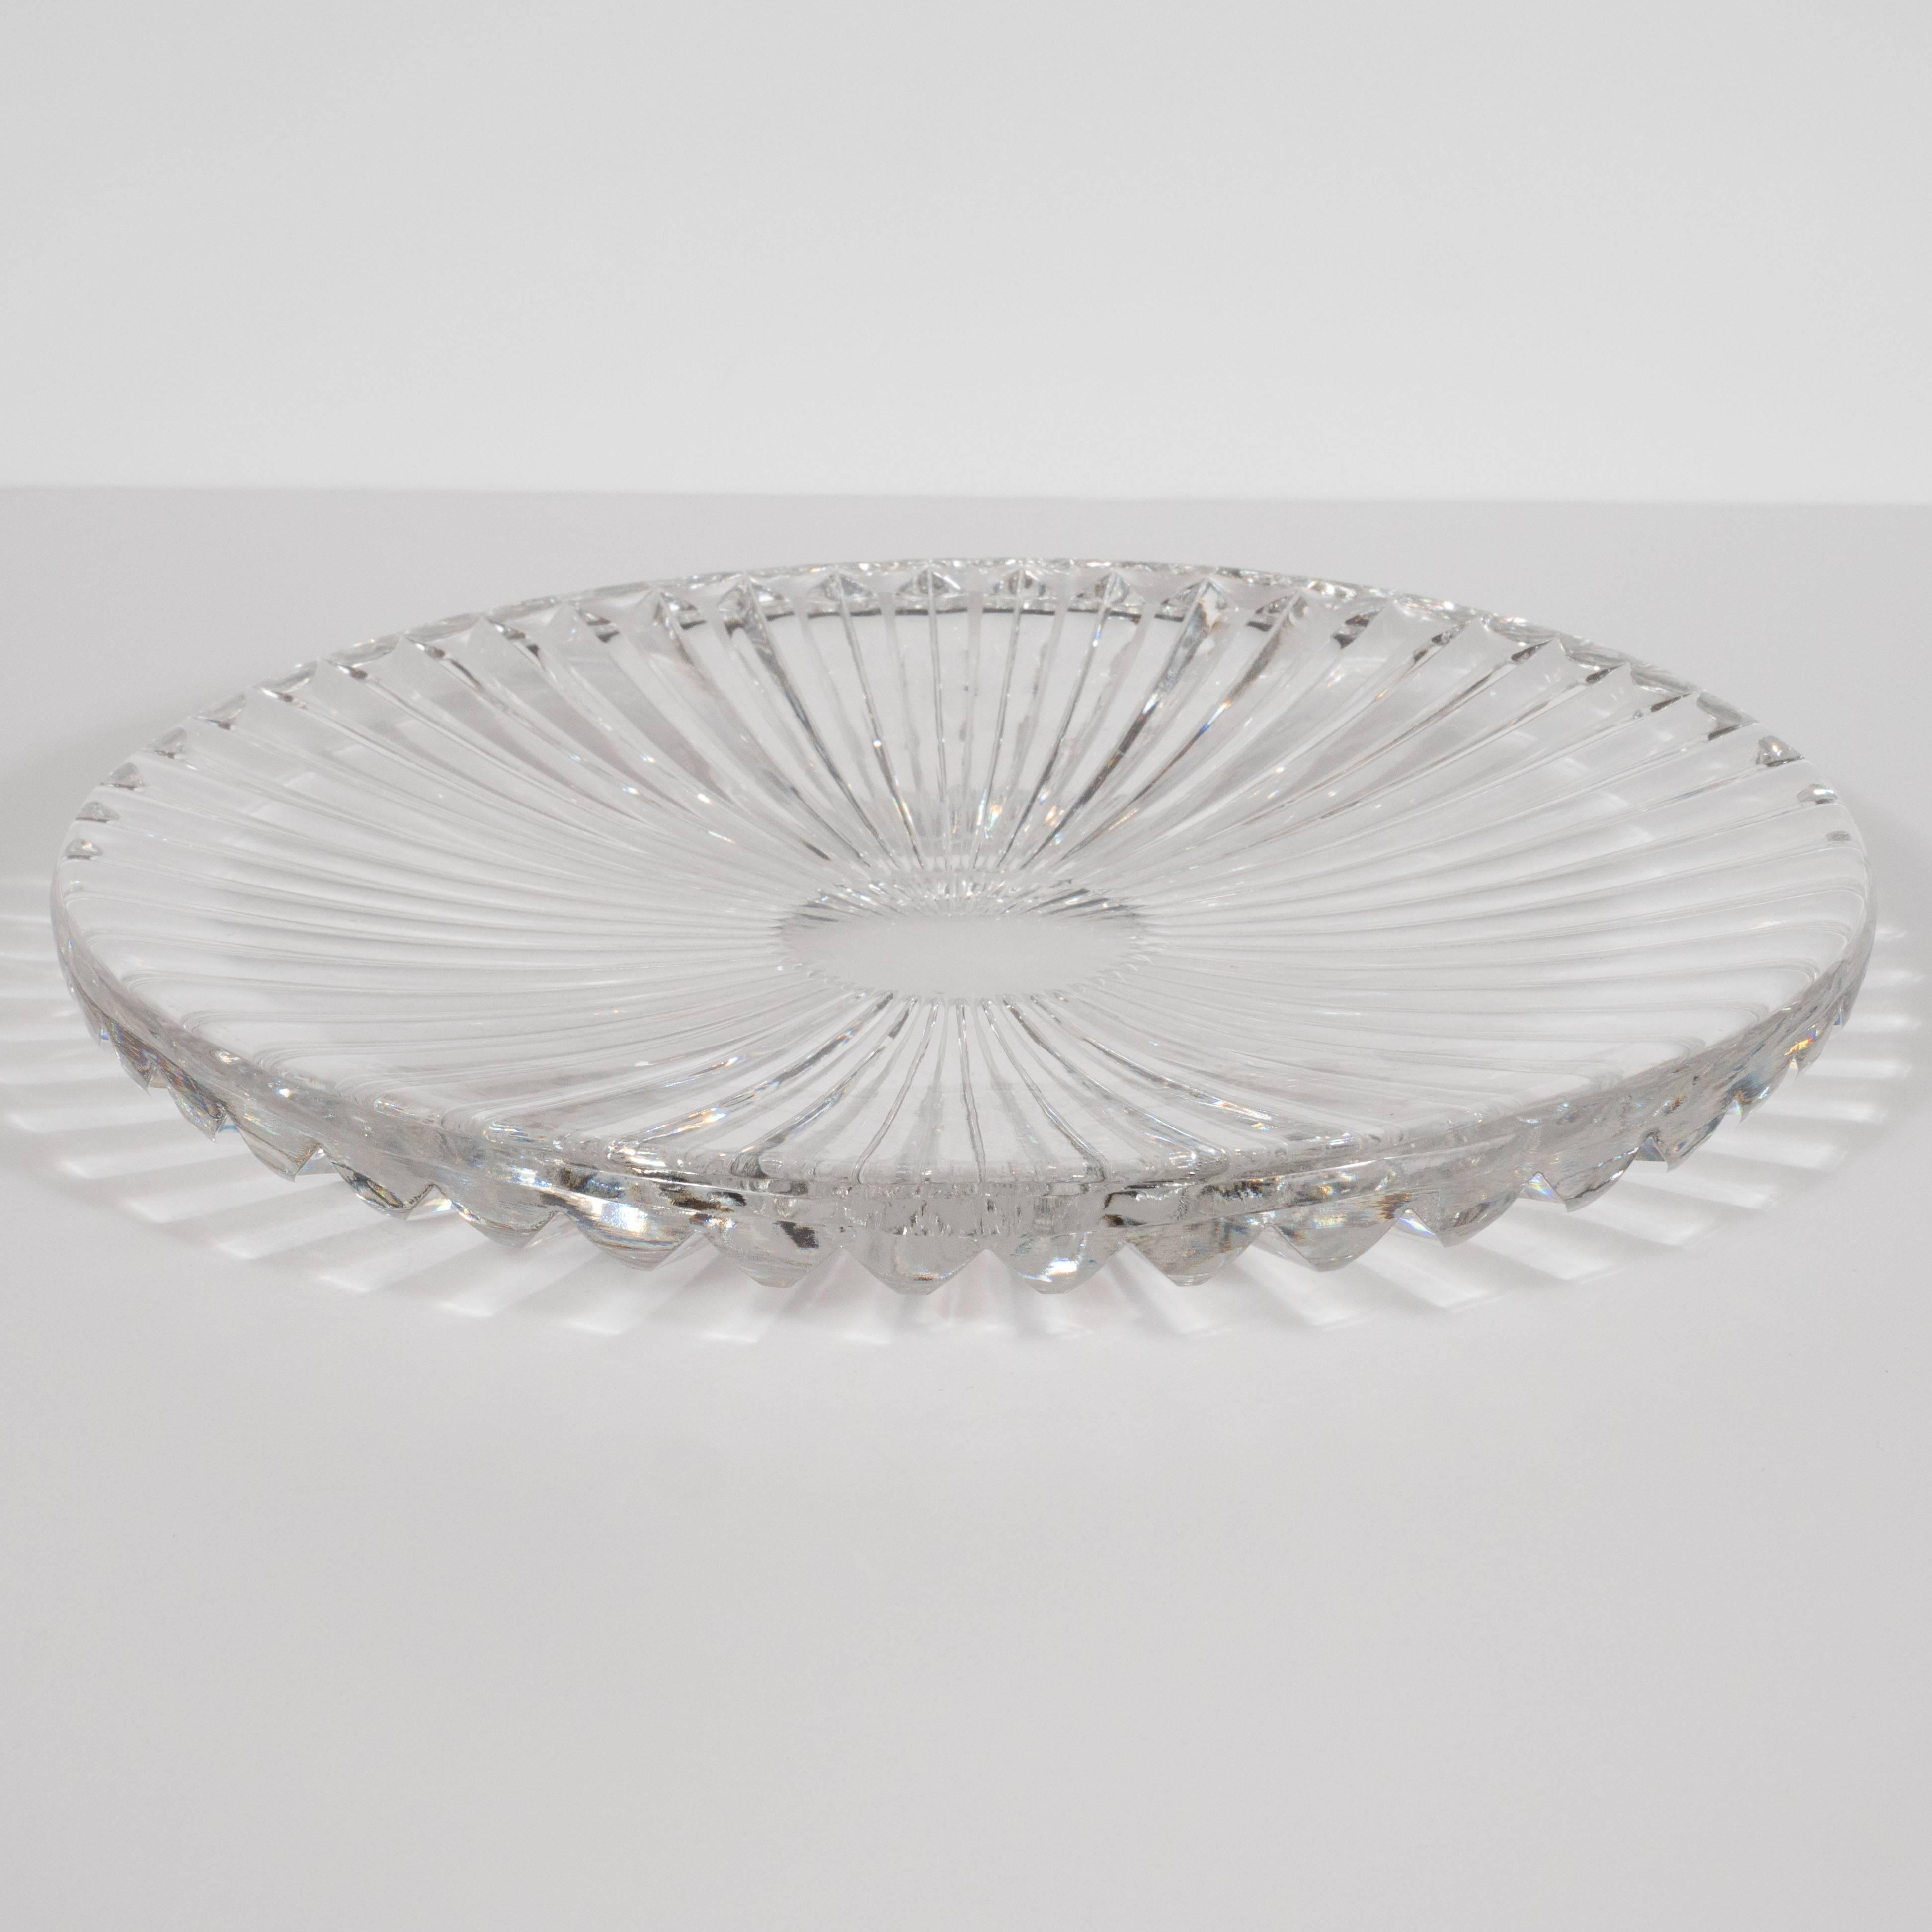 This sophisticated serving plate was realized in the United States, circa 1960. It features a sunburst pattern emanating from the center. The bottom has been incised with deep channels, which create myriad pentagonal forms circumscribing the